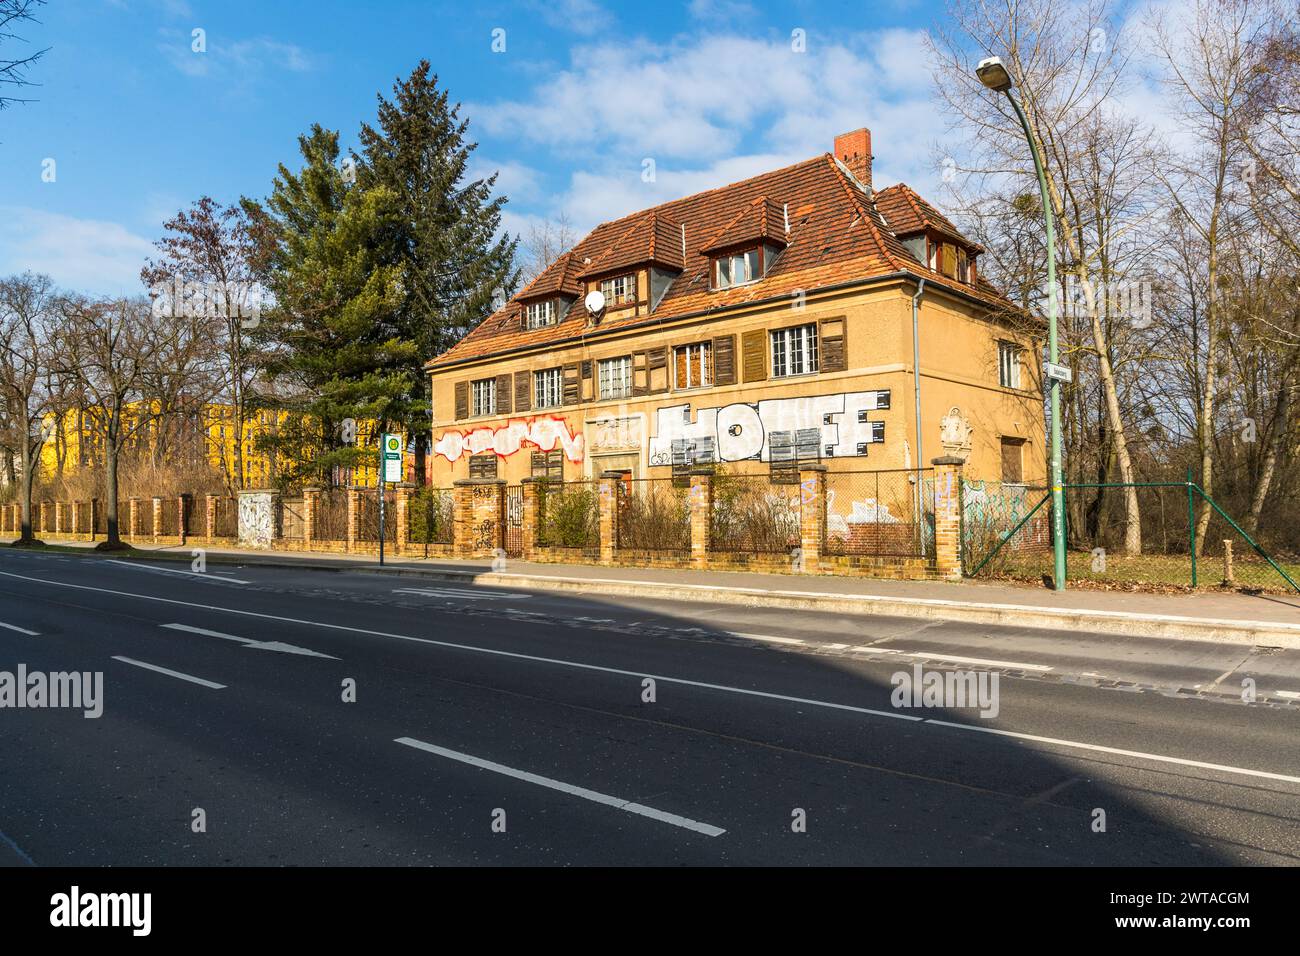 This listed villa is to be integrated into a major architectural project based on designs by Daniel Libeskind. Potsdam, Brandenburg, Brandenburg, Germany Stock Photo